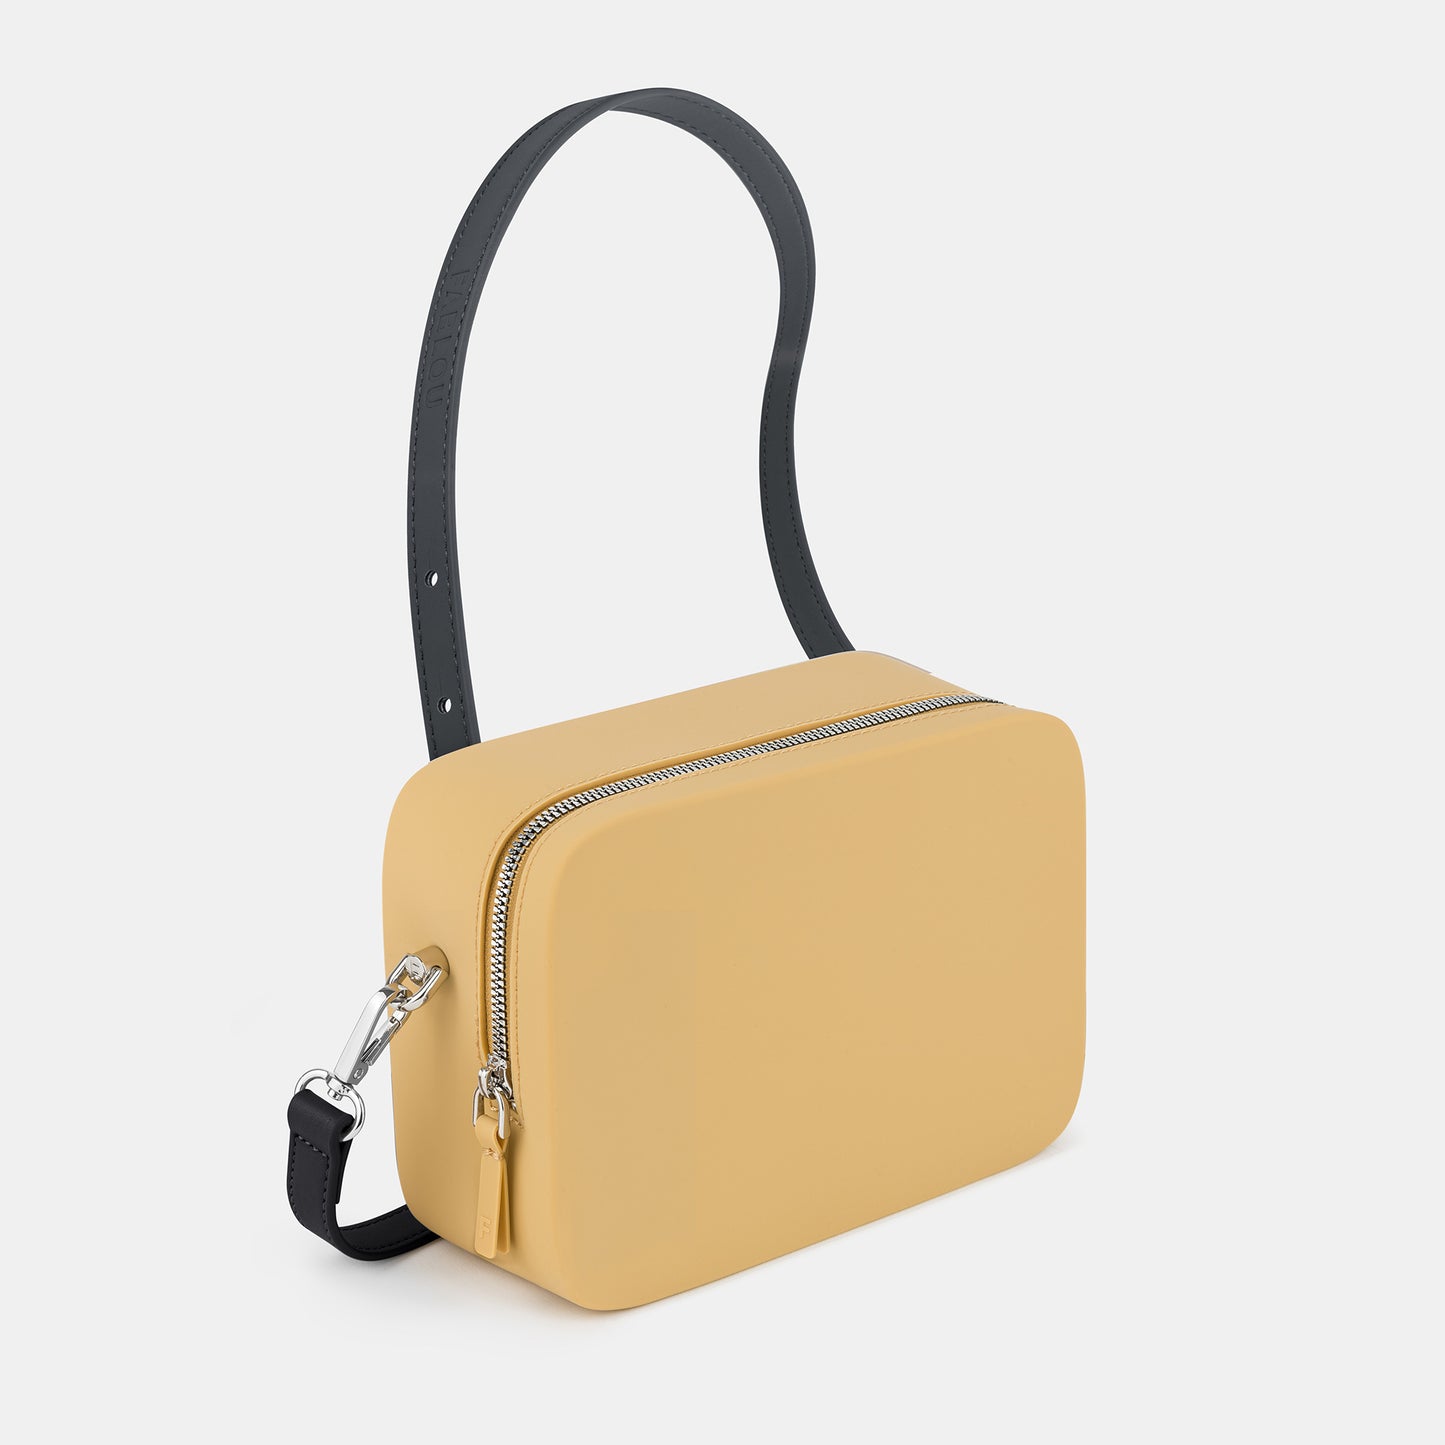 Chelsea Classic | Mustard Yellow with Black Strap